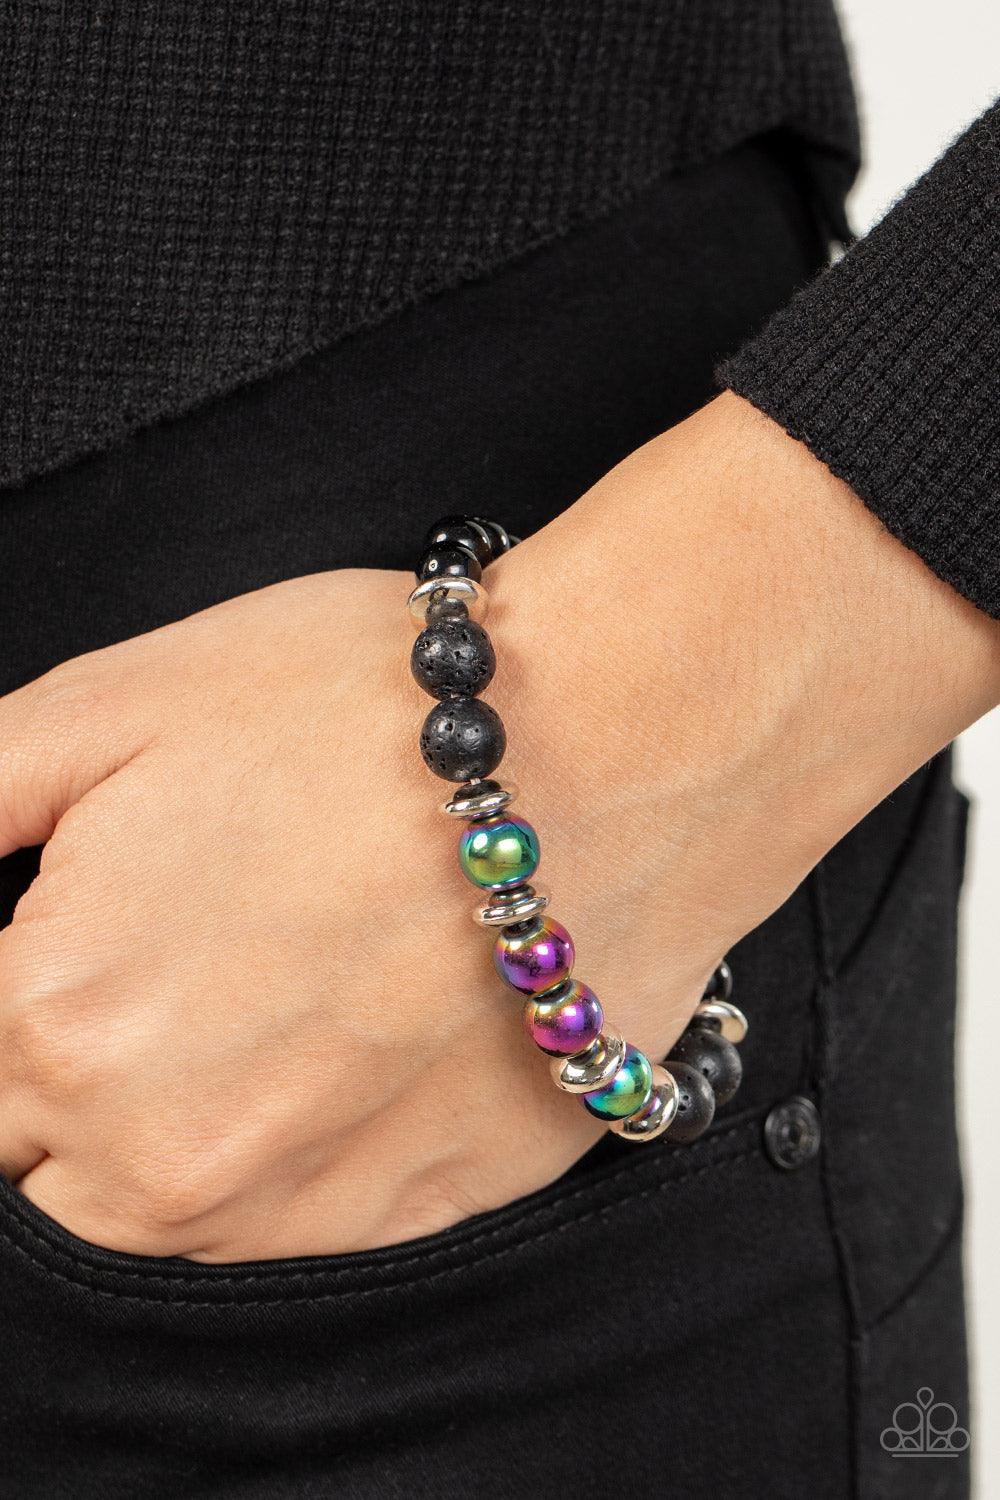 Paparazzi Accessories Mega Metamorphic - Multi Infused with a section of polished black beads, a stellar assortment of oil spill beads, silver accents, and black lava rock beads are threaded along stretchy bands around the wrist for an urban flair. Sold a